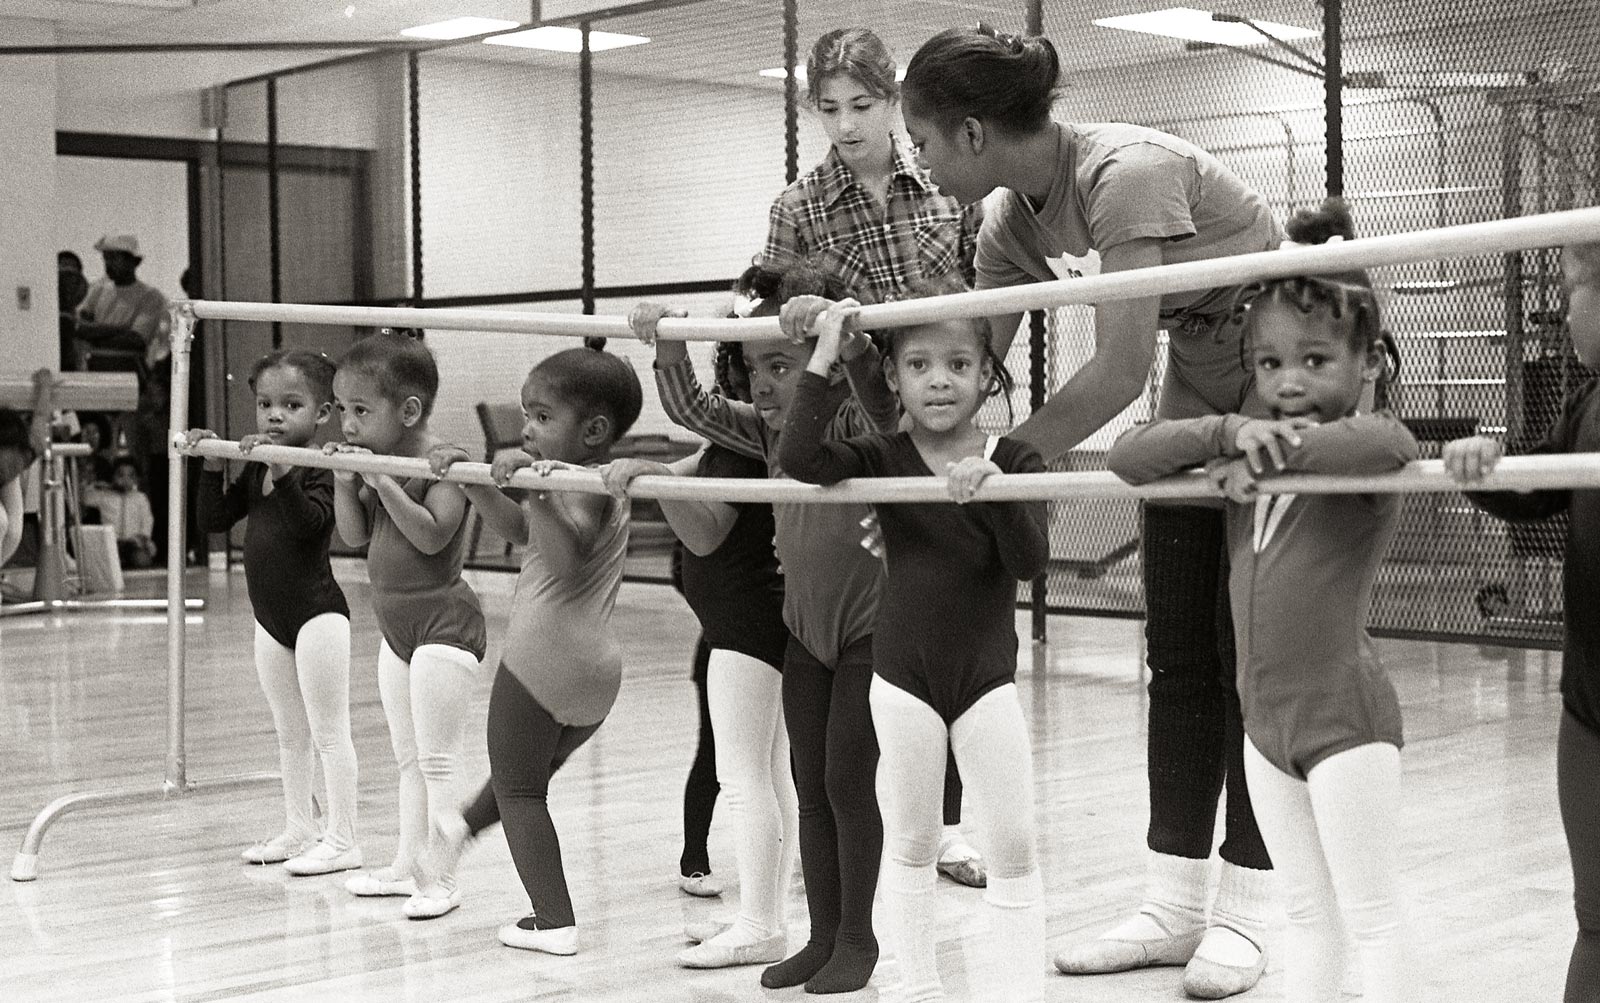 Young dancers at the Barre with instructors